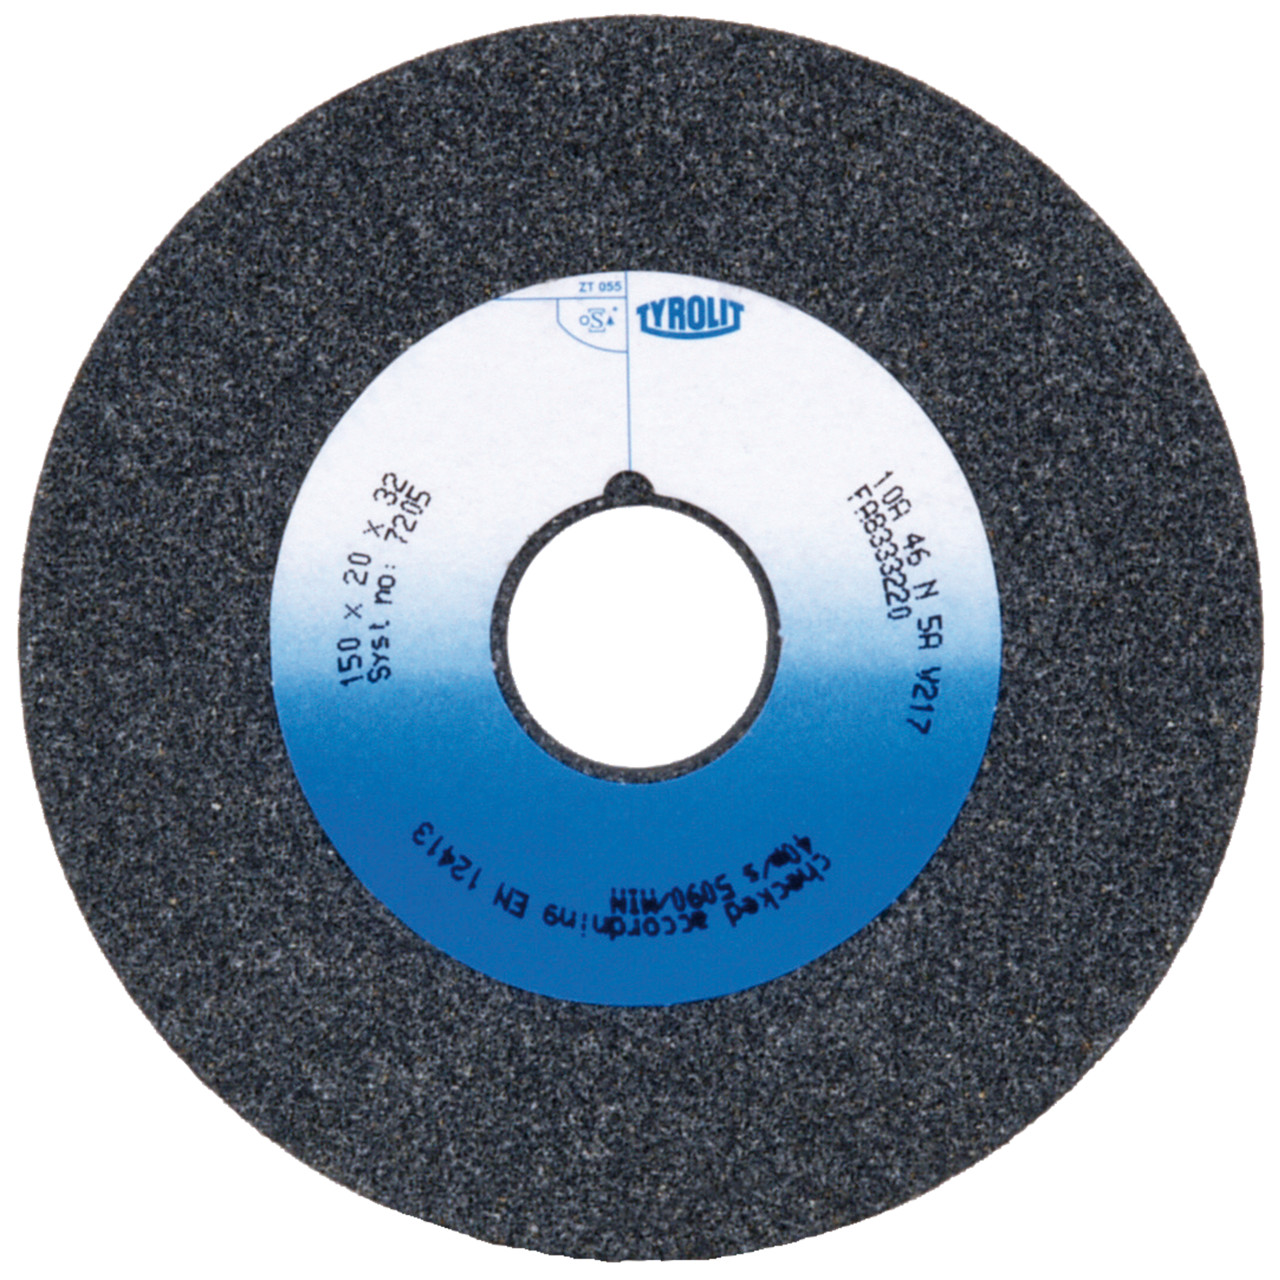 Tyrolit Conventional ceramic grinding discs DxDxH 200x20x40 For unalloyed and low-alloy steels, shape: 1, Art. 147656